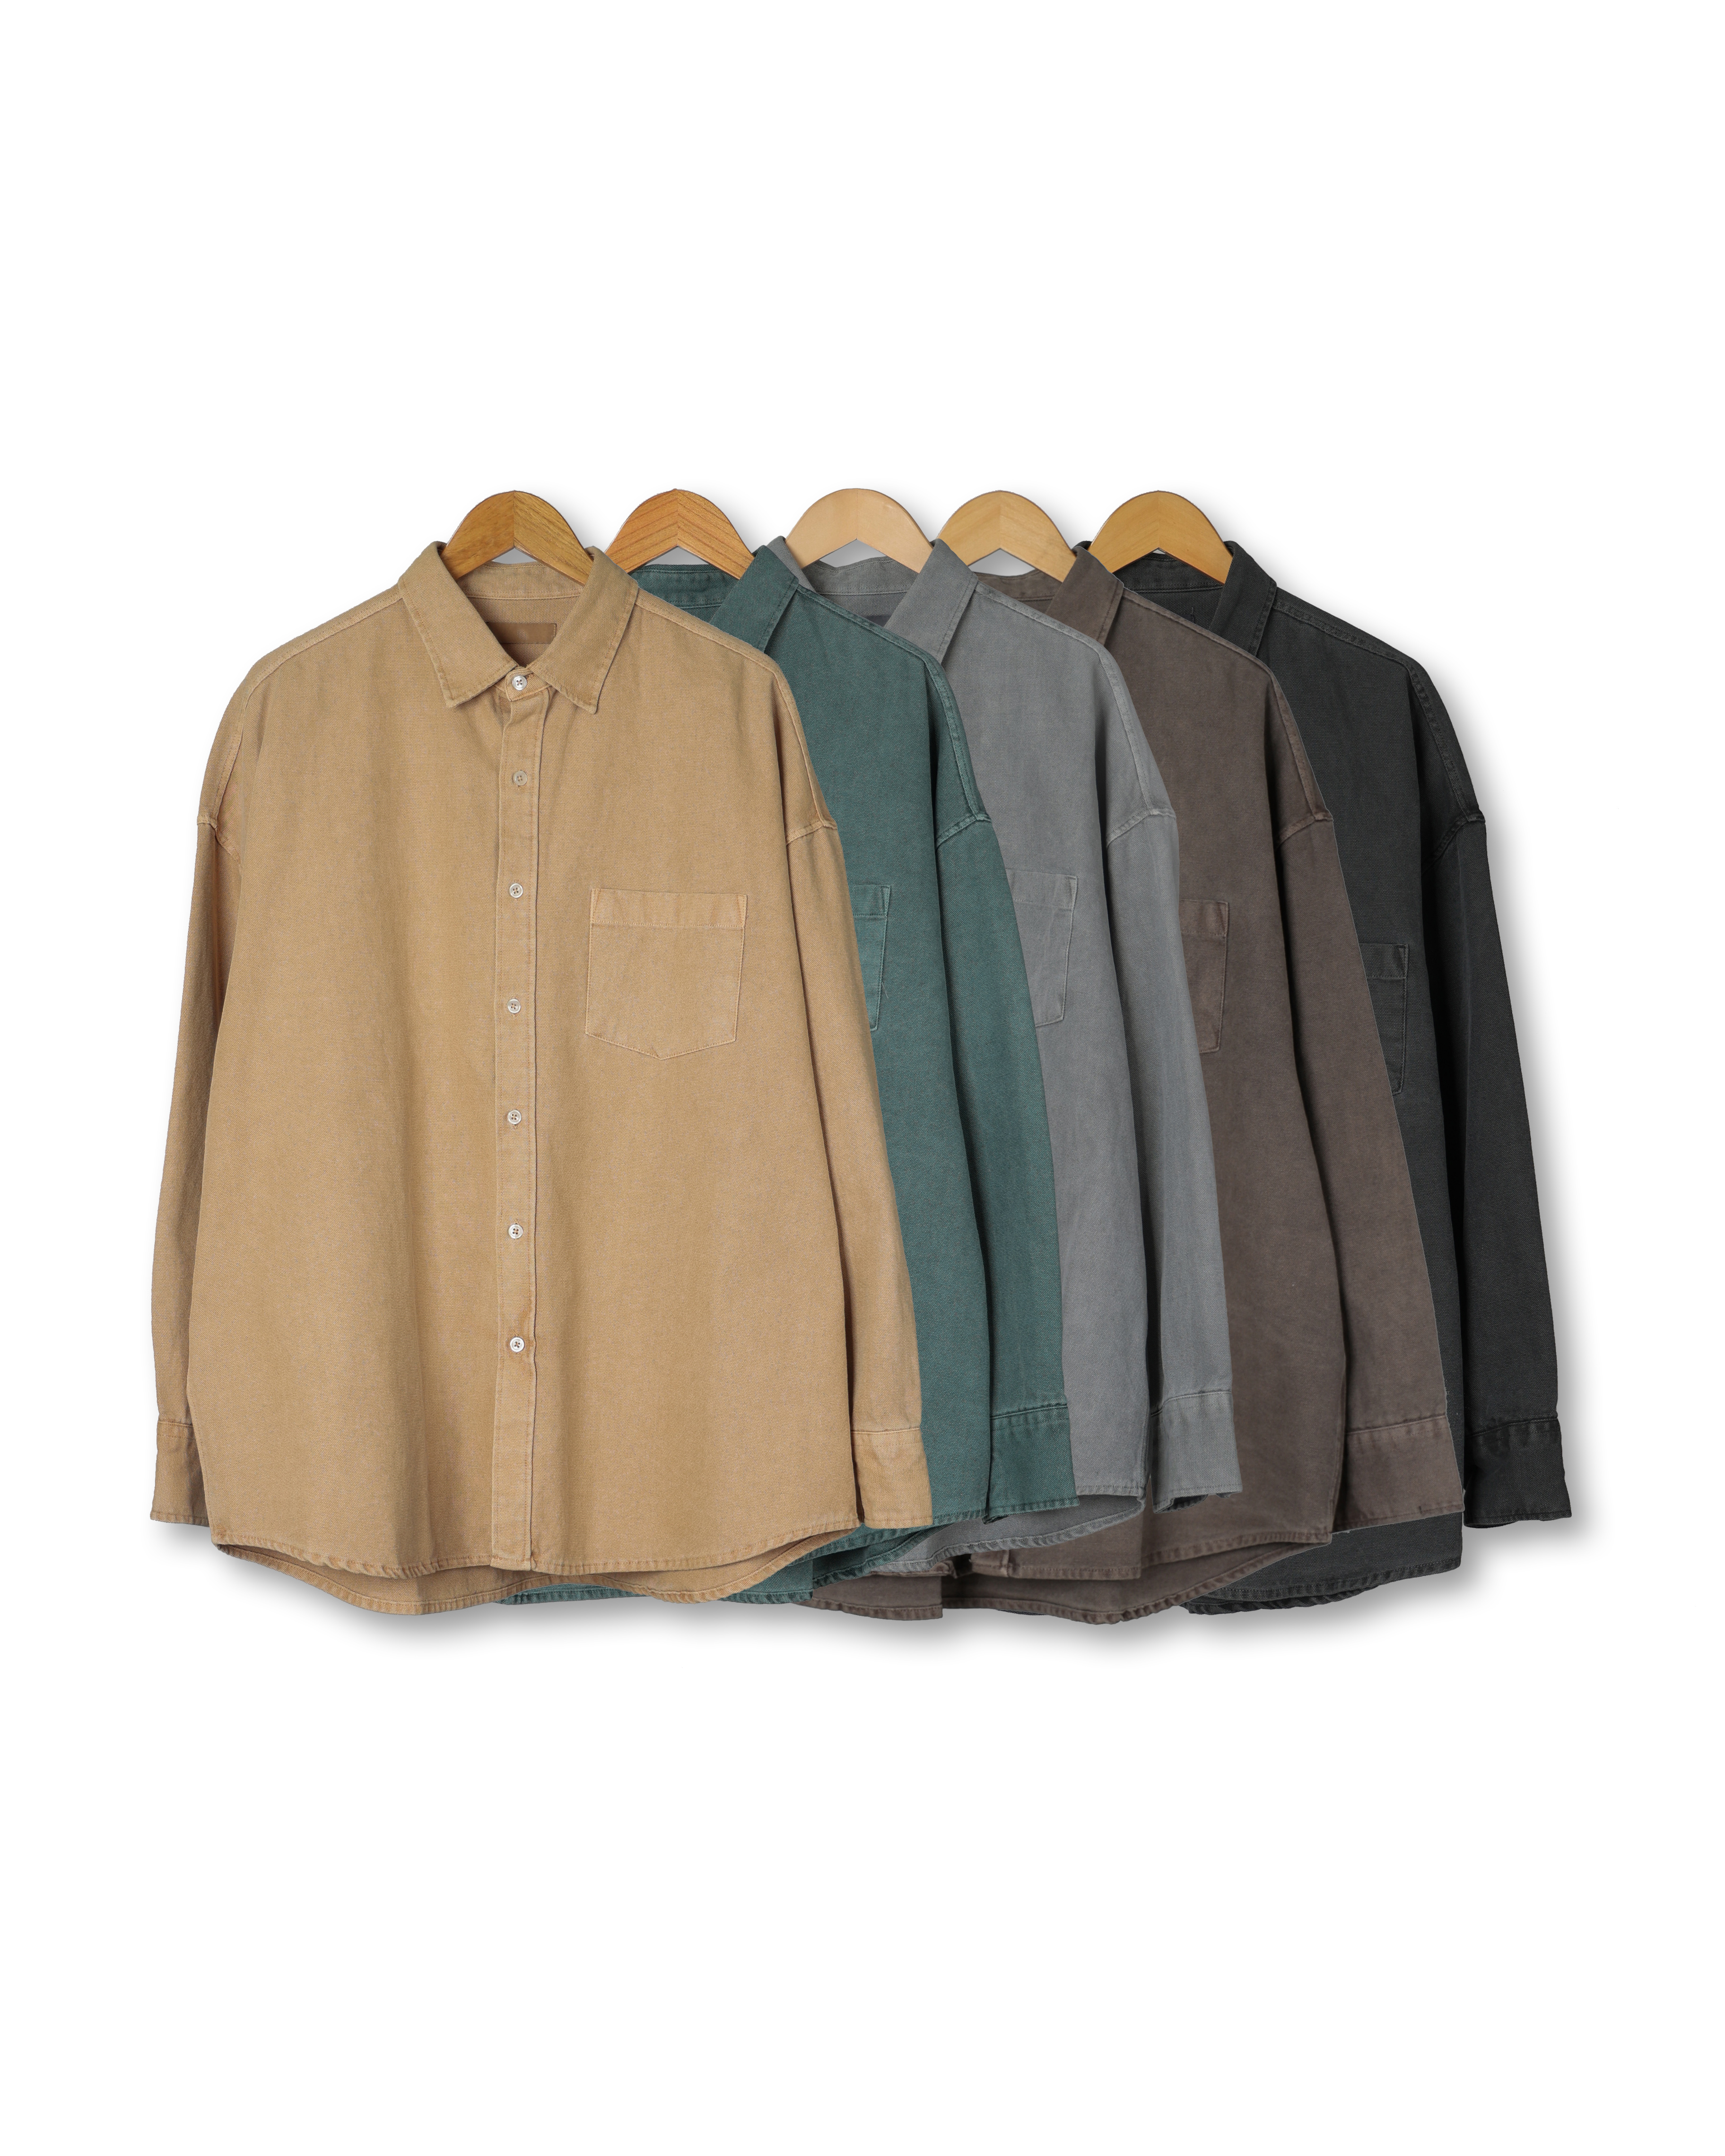 CONS Over Pigment Hard Cotton Shirts (Charcoal/Gray/Brown/Blue Green/Yellow)